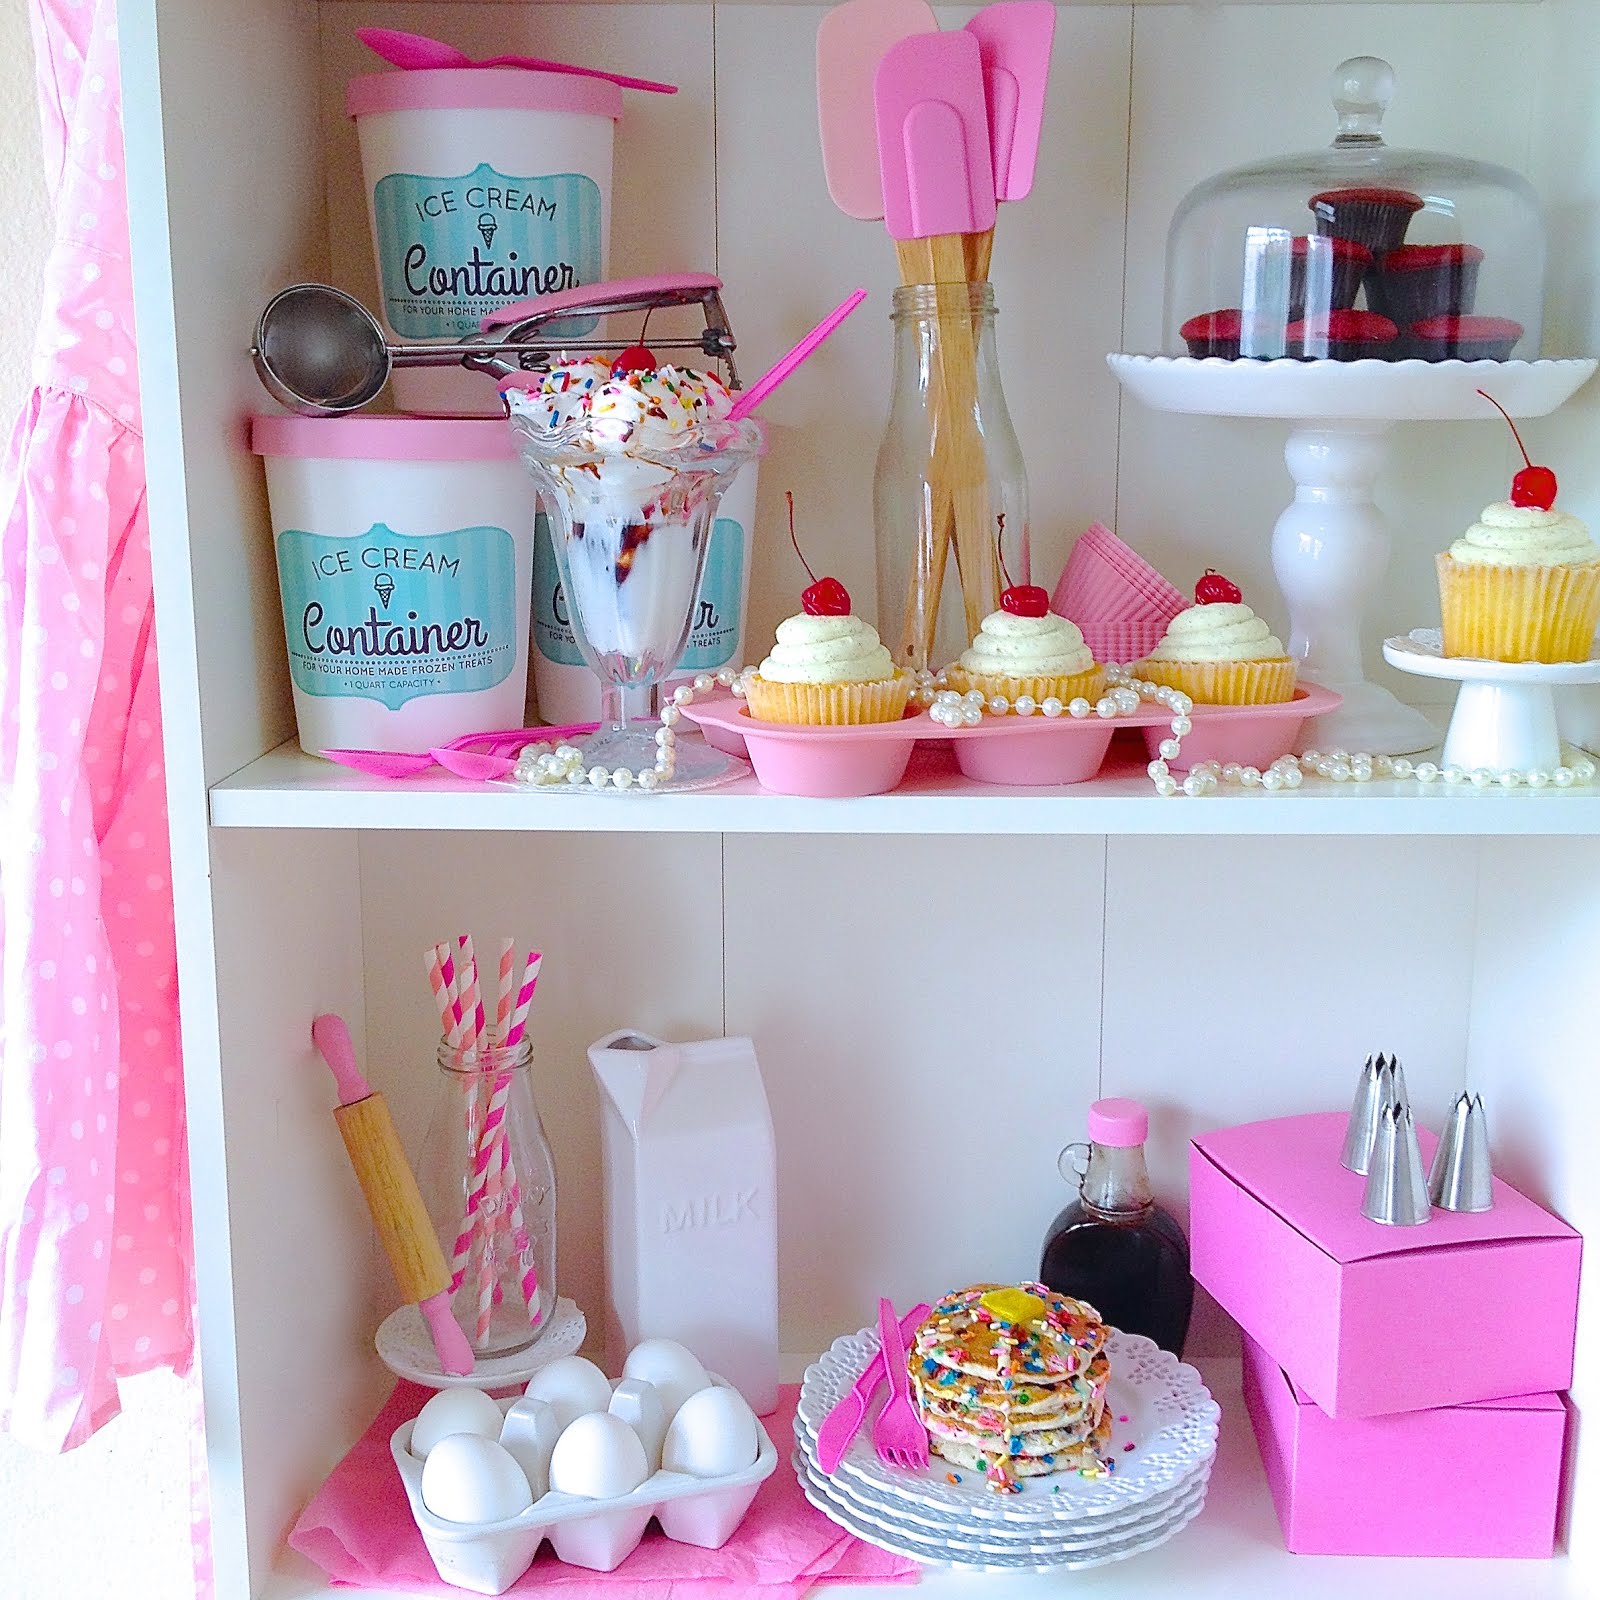 Pink kitchen utensils and pink coffee maker  Pink kitchen, Pink home  decor, Pink kitchen utensils